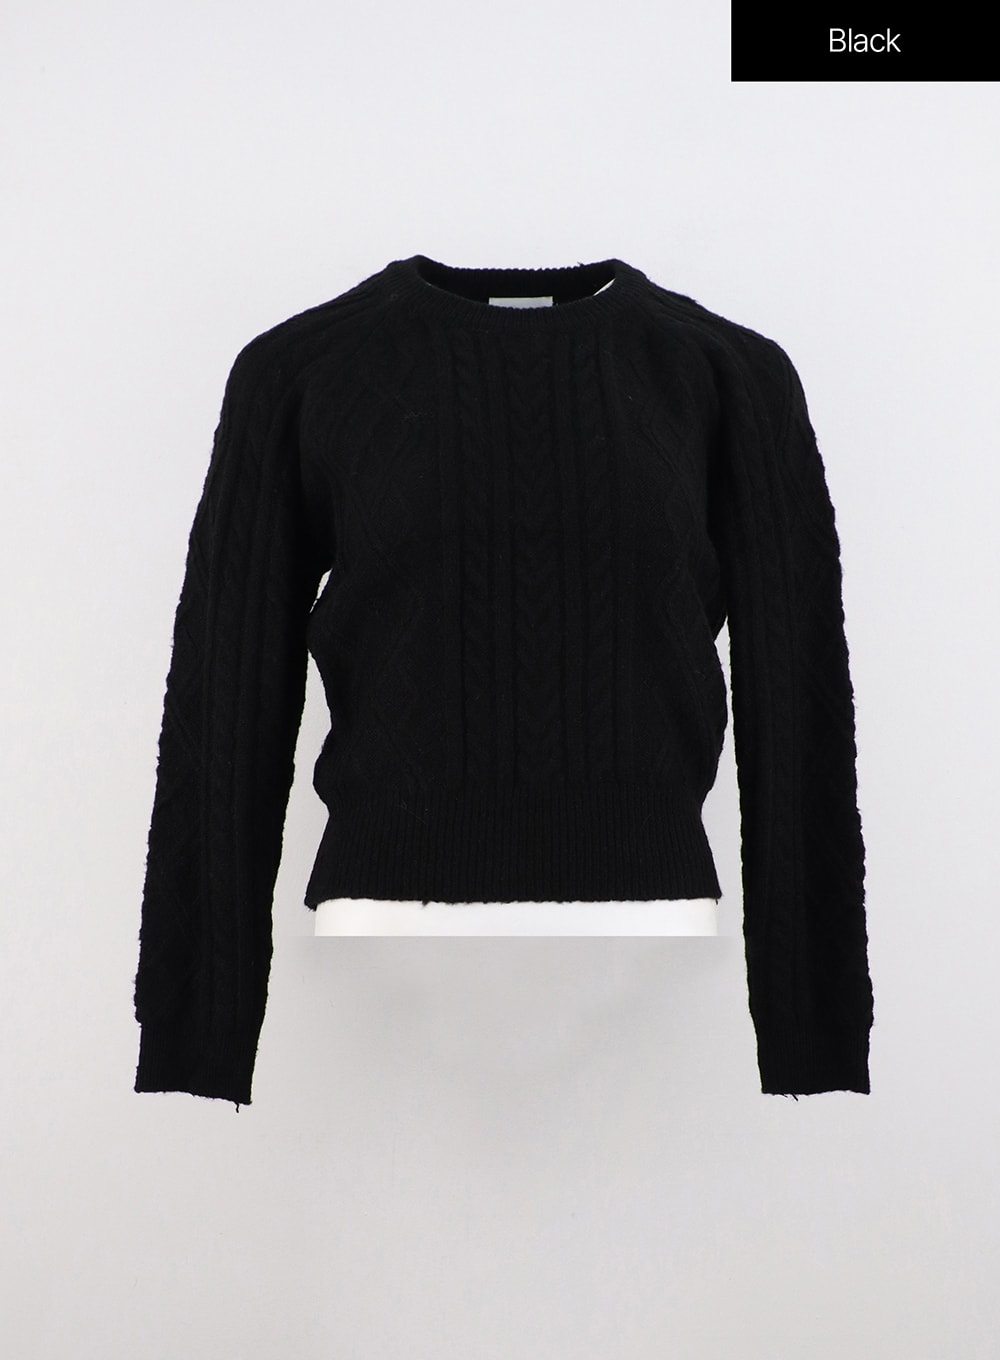 classic-cable-knit-sweater-oo319 / Black